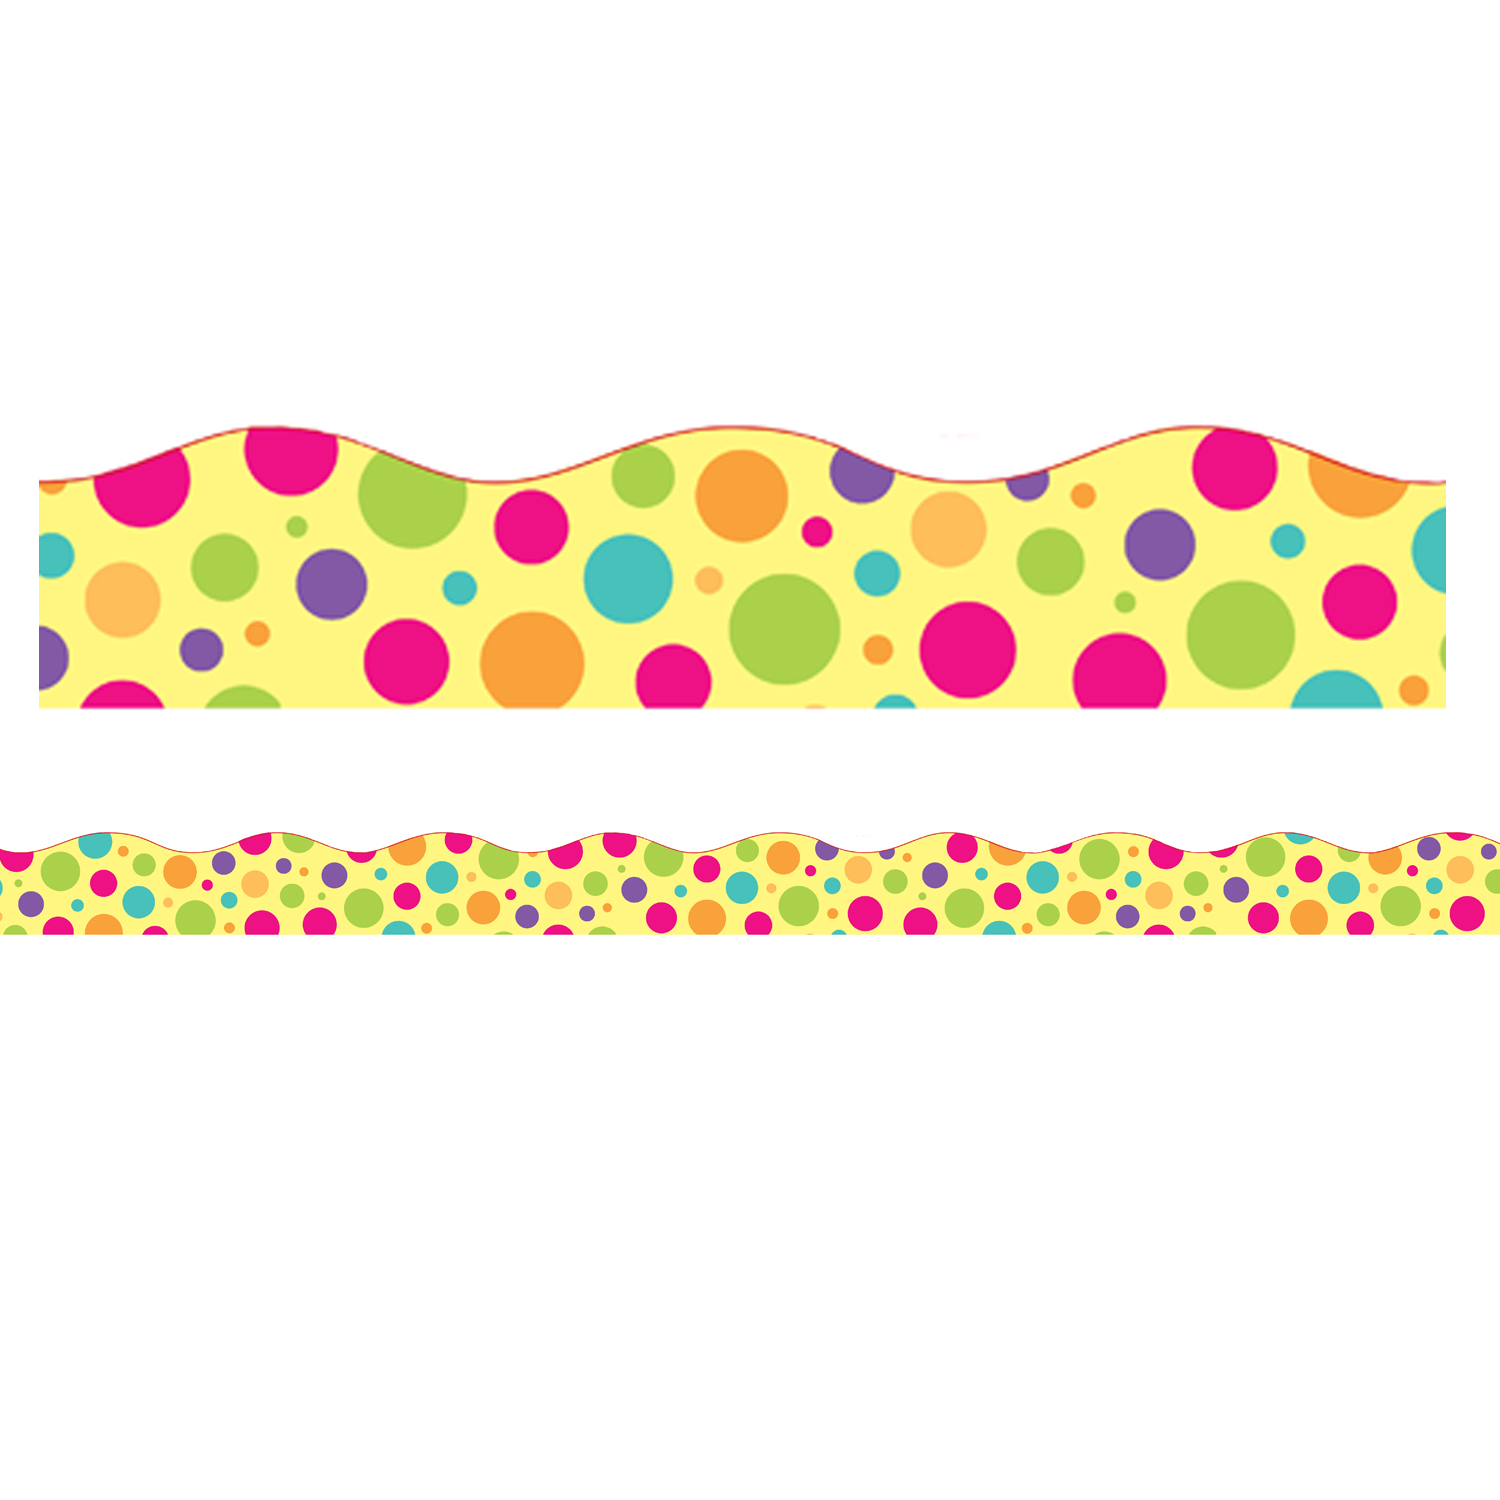 Magnetic Scallop Borders/Trims, 1.5" x 24", Colorful Dot Theme, Pack of 12